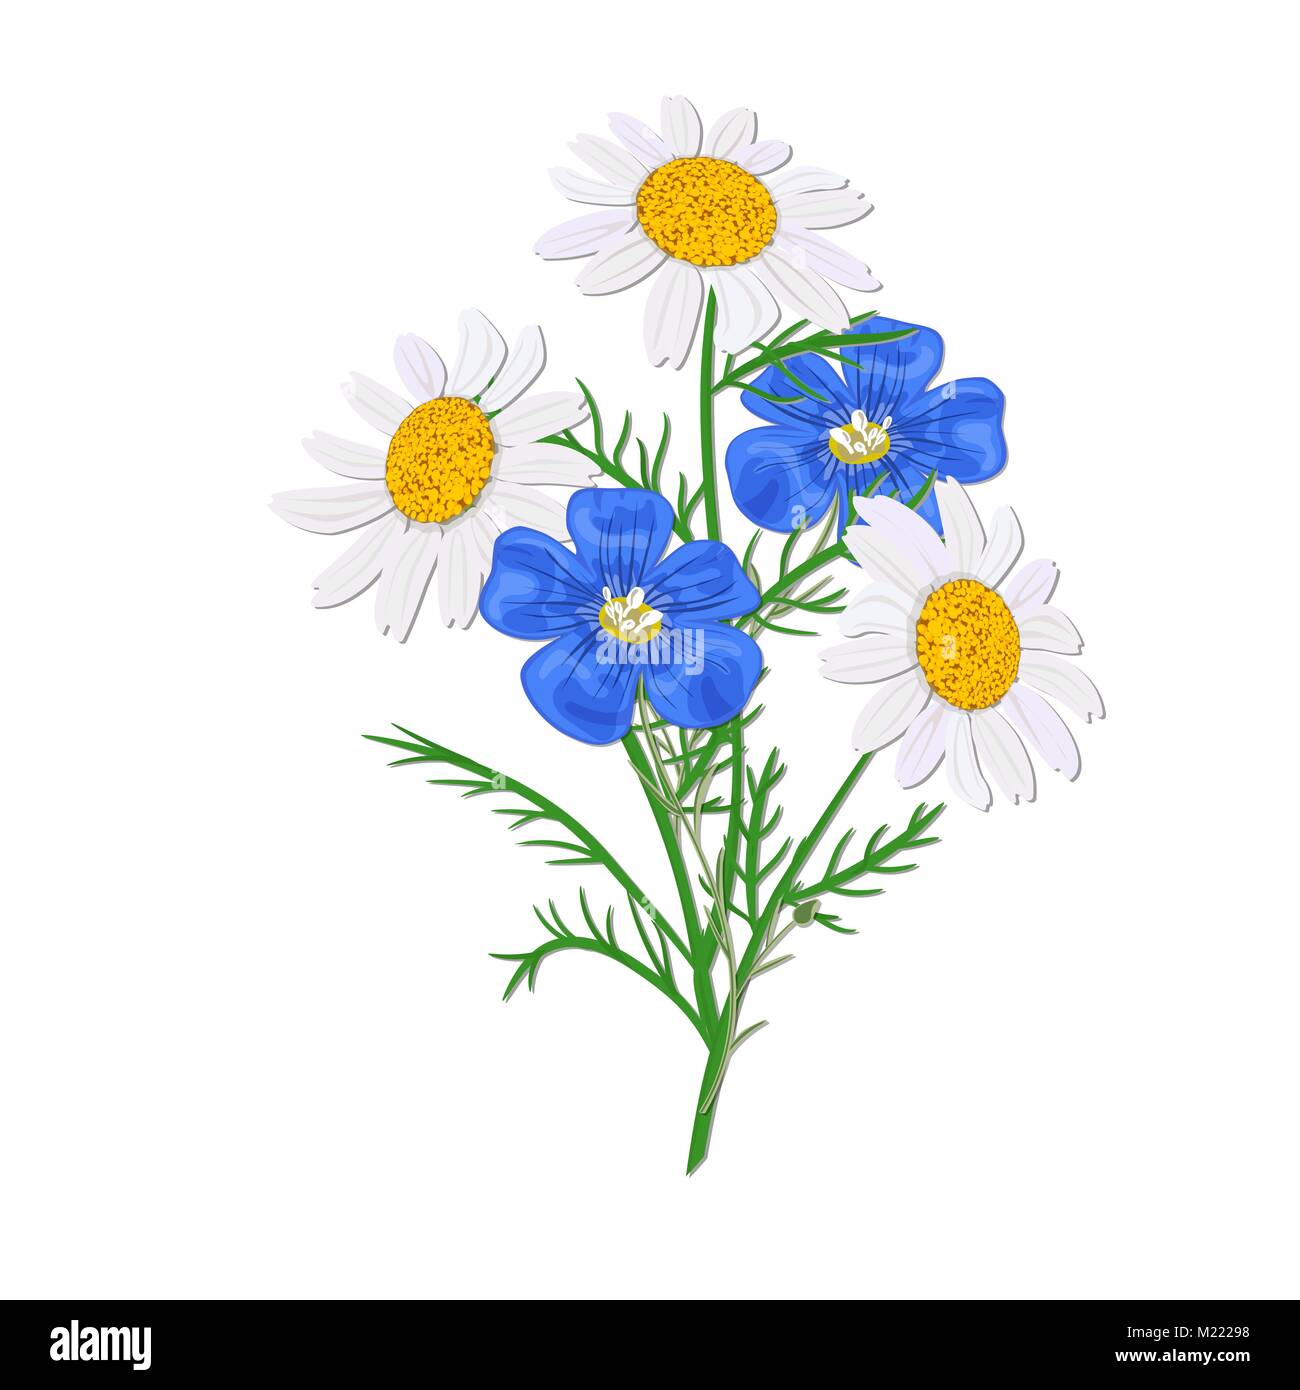 Daisy or chamomile Wildflower isolated with stem. Flax, forget-me-not blue bouquet flowers Stock Vector